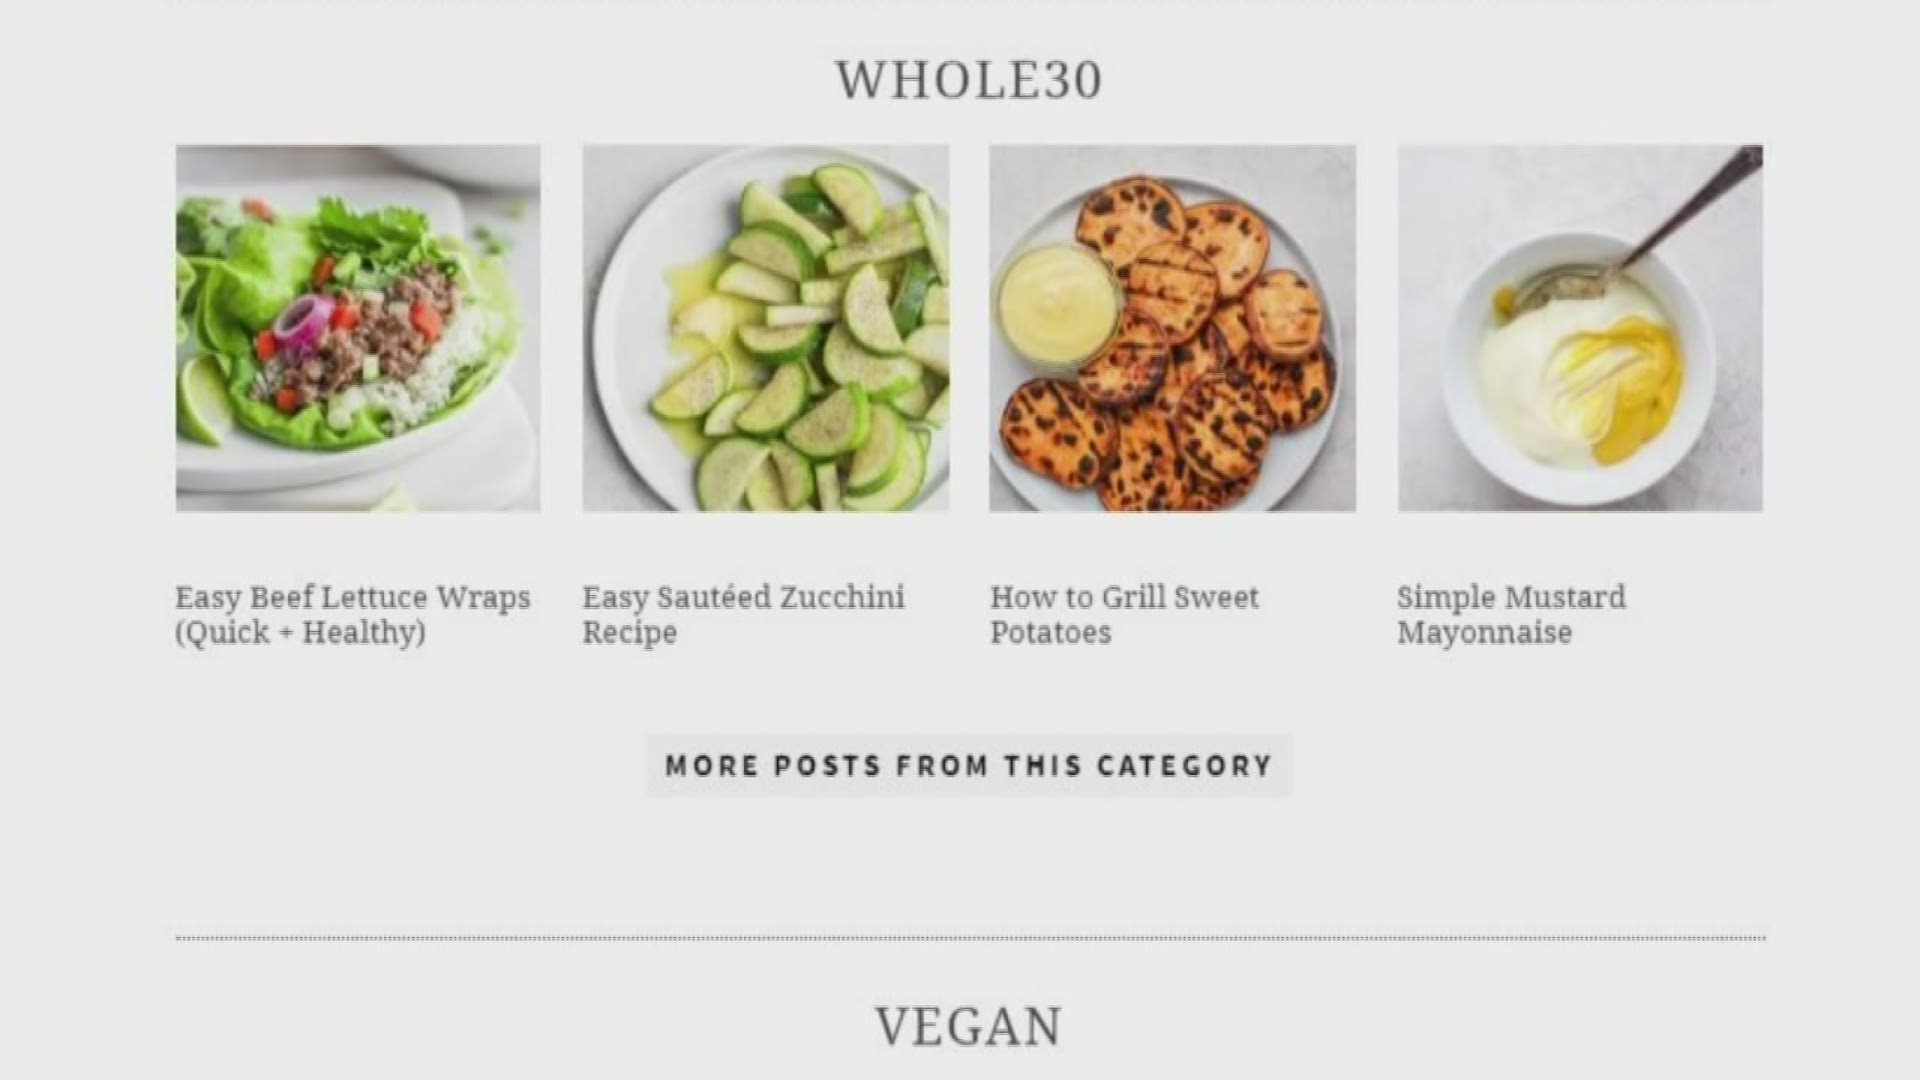 Jensen launched The Wooden Skillet - a food blog geared towards Whole 30, Paleo, gluten-free & dairy-free recipes.